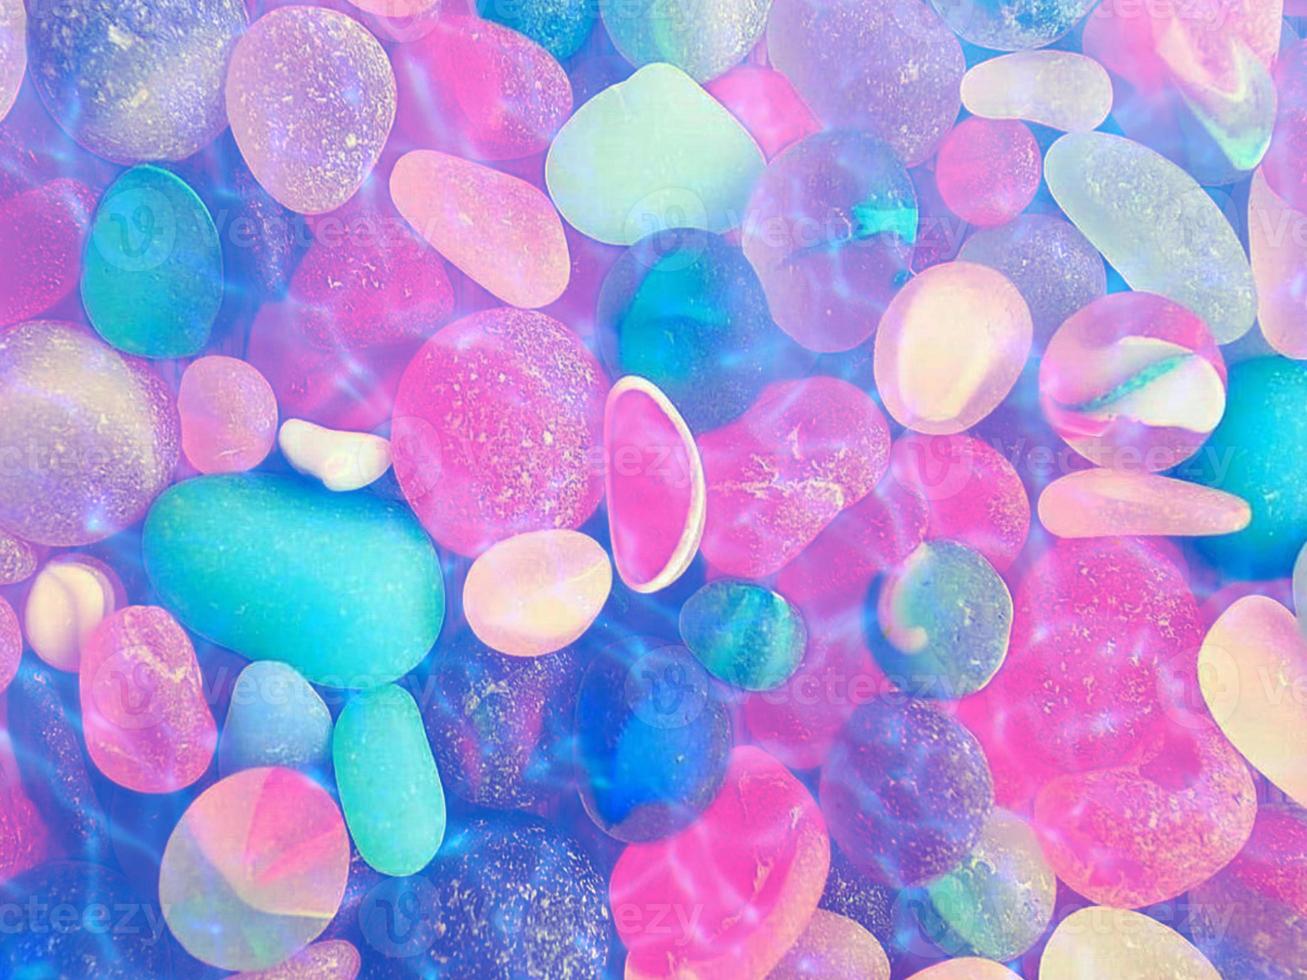 Defocus blurred transparent stone colored underwater clear calm water surface texture with splashes and bubbles. Trendy abstract nature background. Water waves in sunlight. The underwater stone backgr